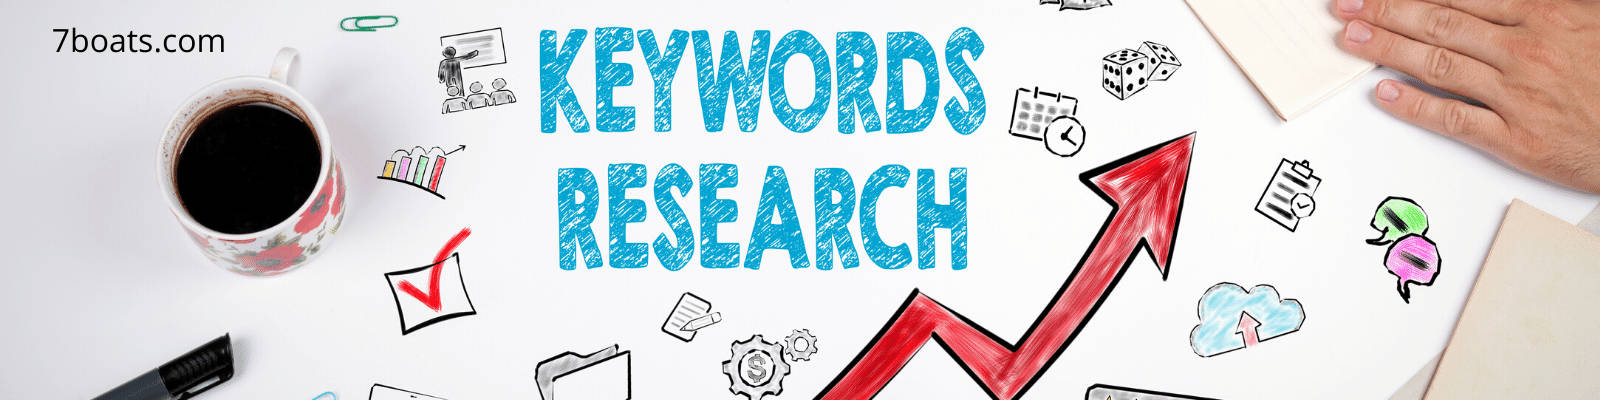 How To Do Keyword Research & Keyword Analysis Effectively – Keyword Research Guide for SEO